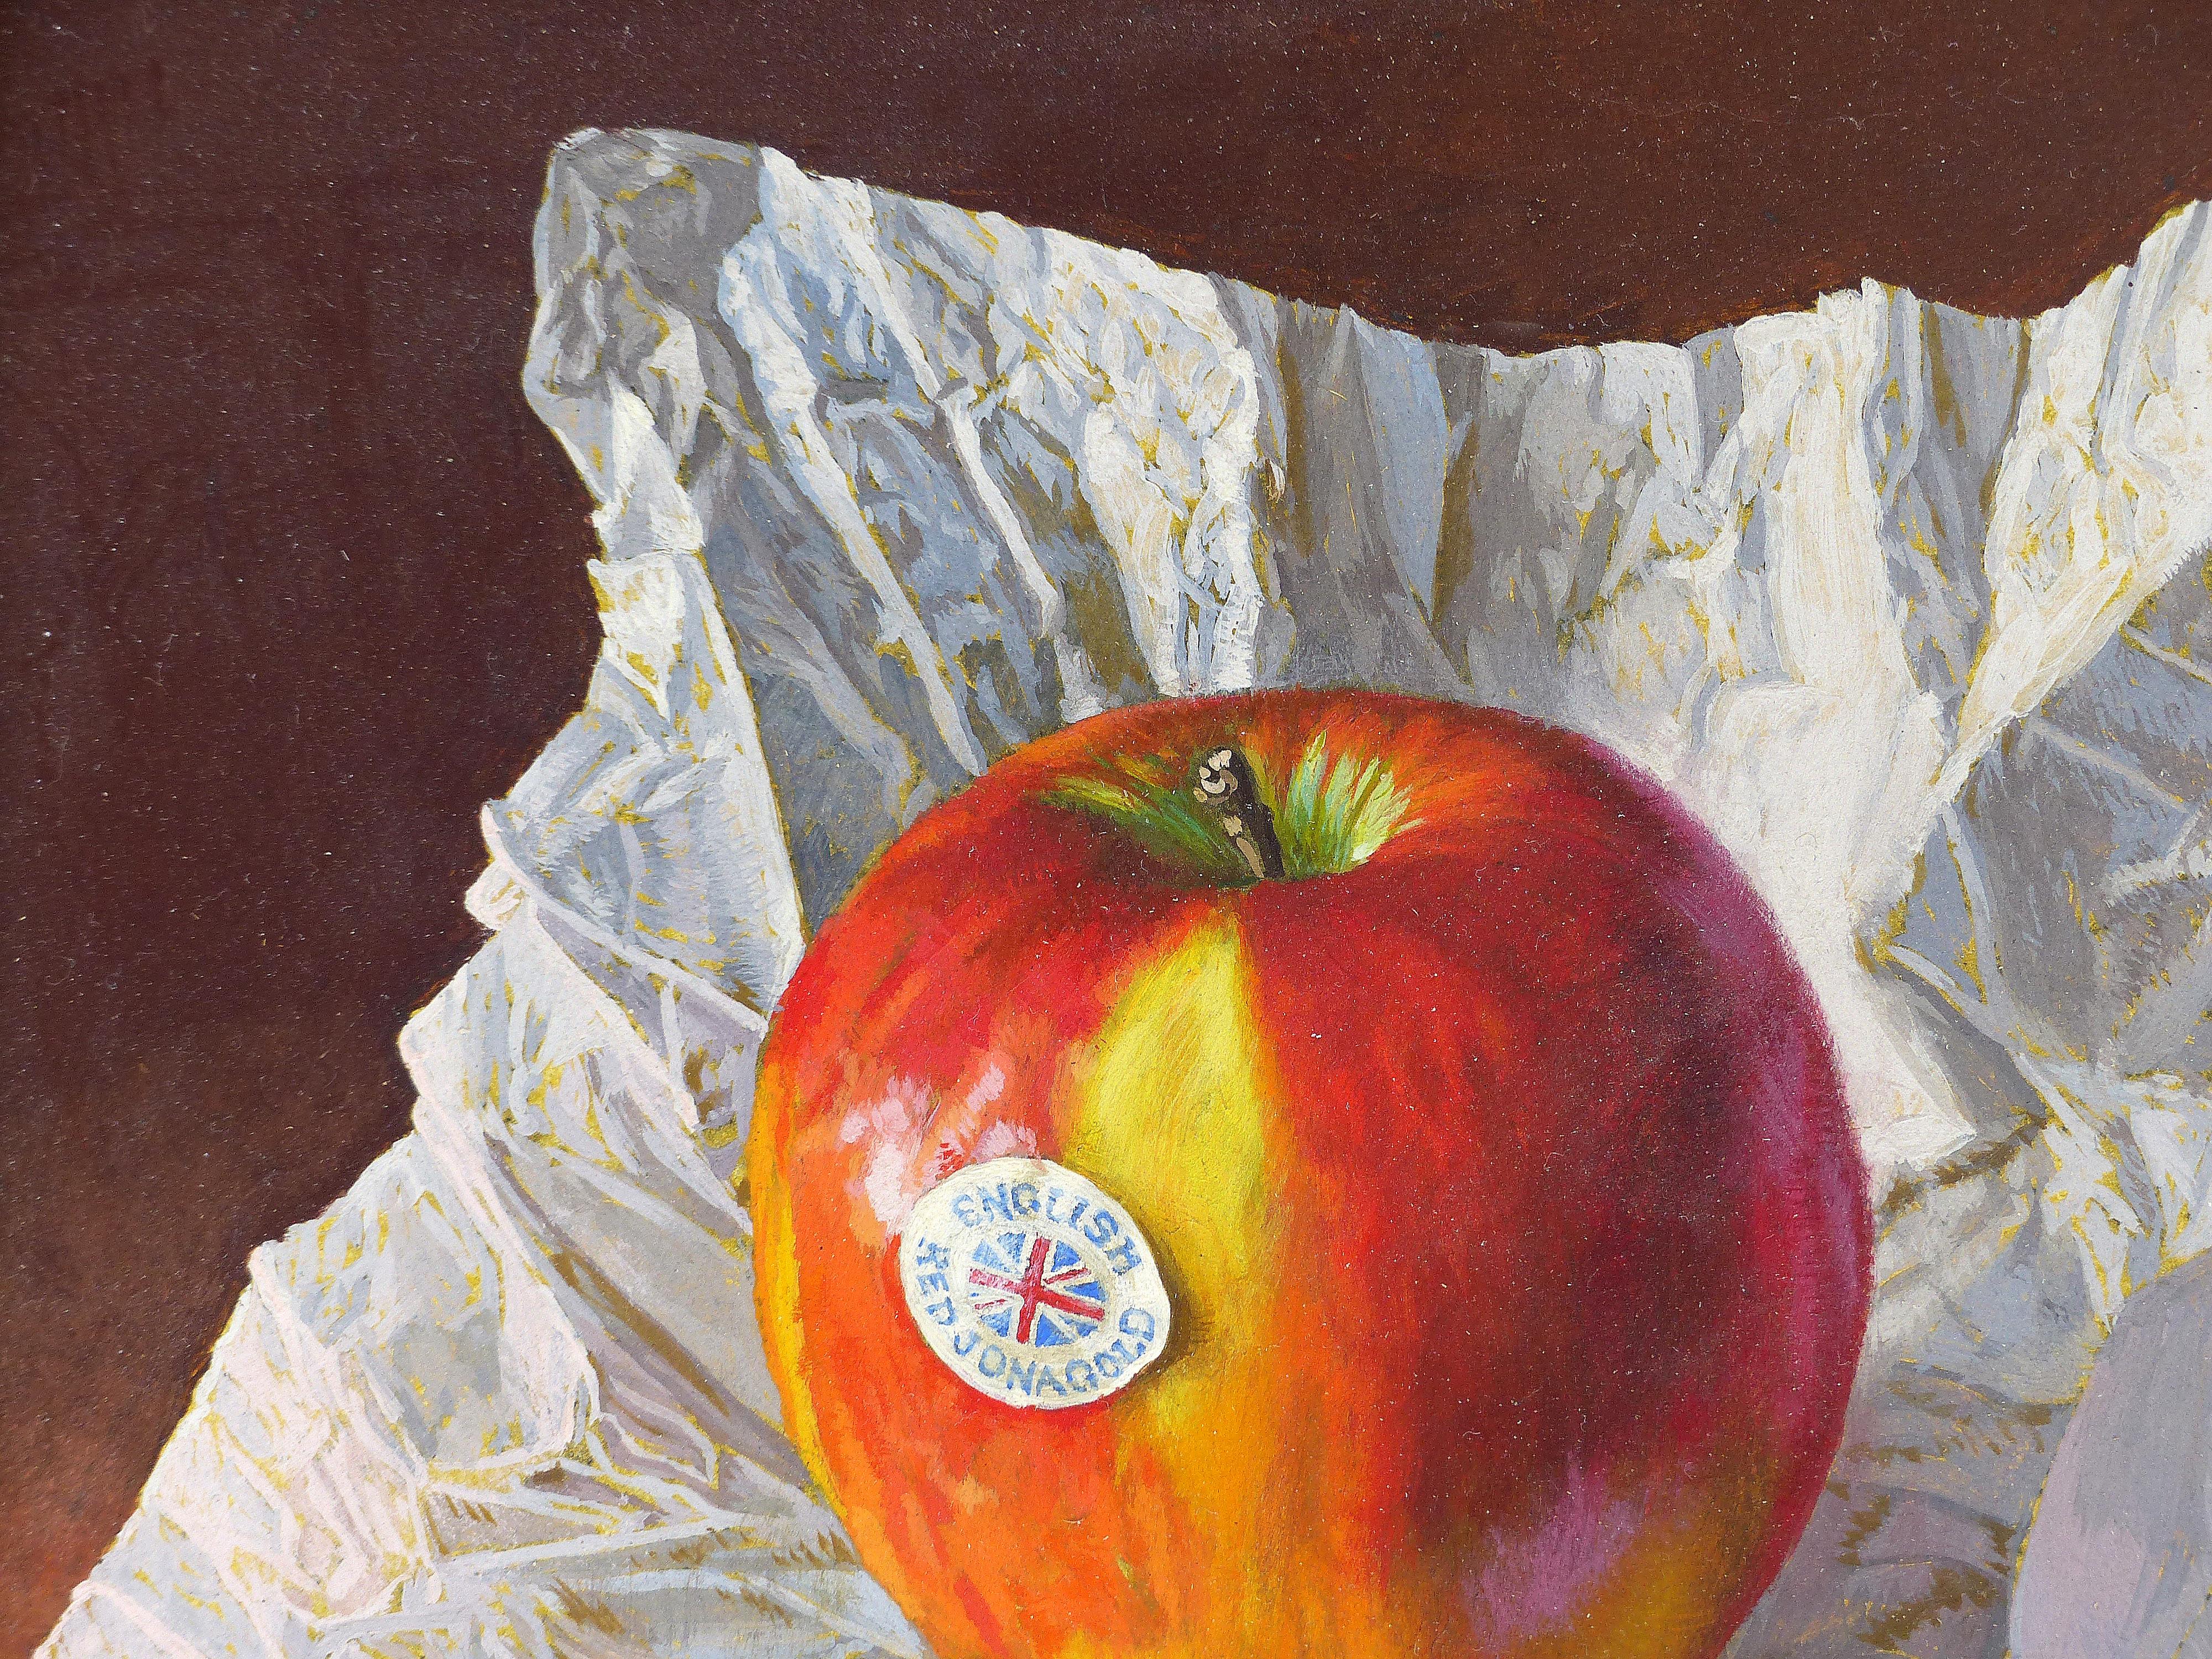 Hand-Painted Super-Realism Still-Life Apple Painting by James Eddie, 1995 For Sale